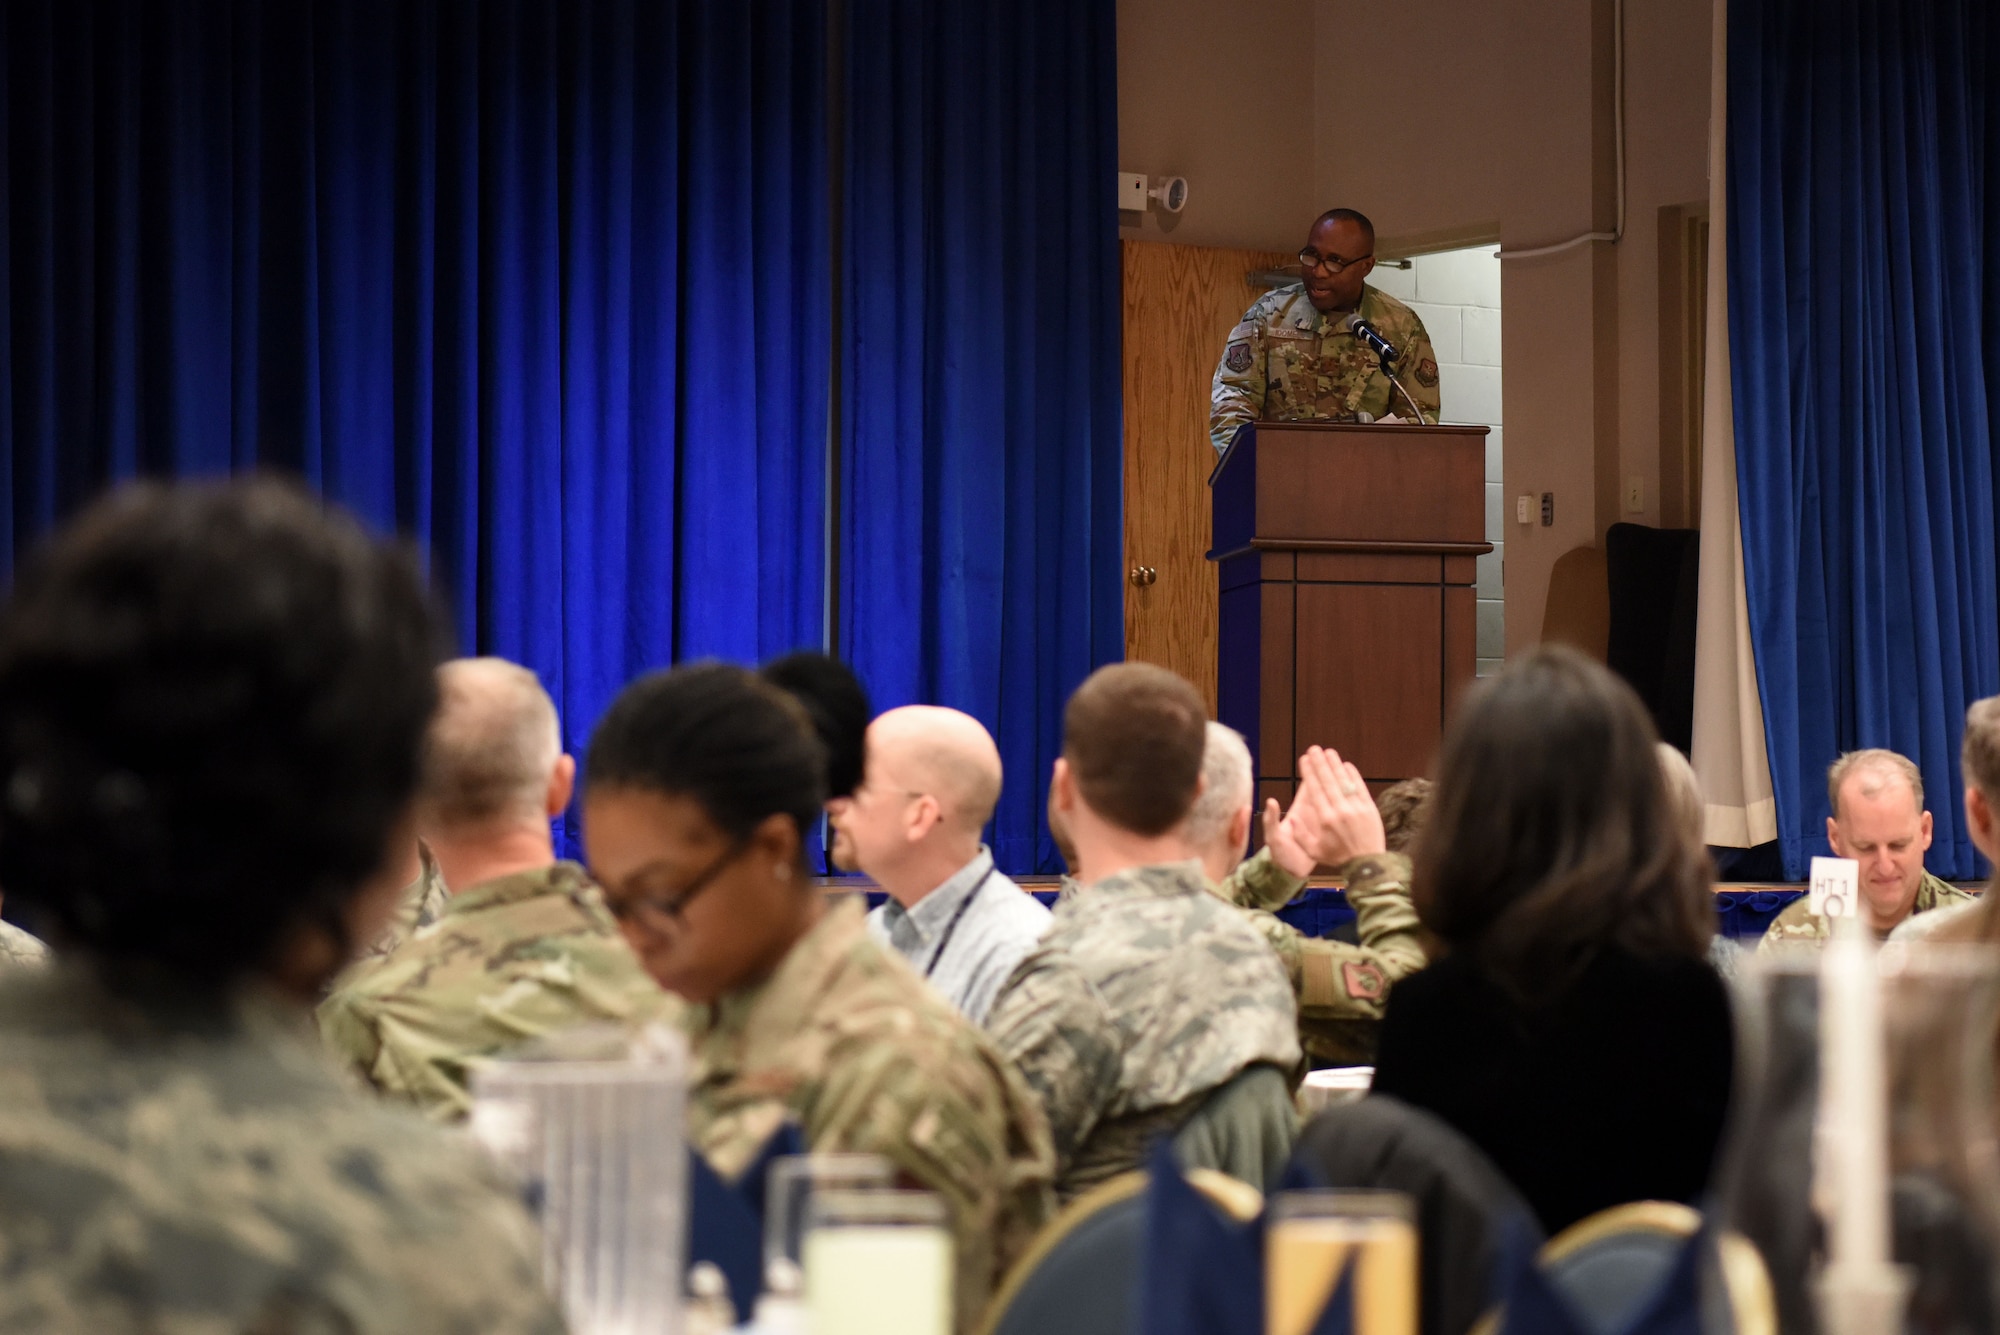 U.S. Air Force Chaplain Capt. Joseph Idomele, 51st Fighter Wing chaplain, introduces the guest speaker for the Chaplain Corps resiliency luncheon held at the Officer’s Club on Osan Air Base, Republic of Korea, Feb. 21, 2019. The event’s guest speaker was retired Air Force Chief of Chaplains, Maj. Gen. Dondi Costin. (U.S. Air Force photo by Senior Airman Kelsey Tucker)